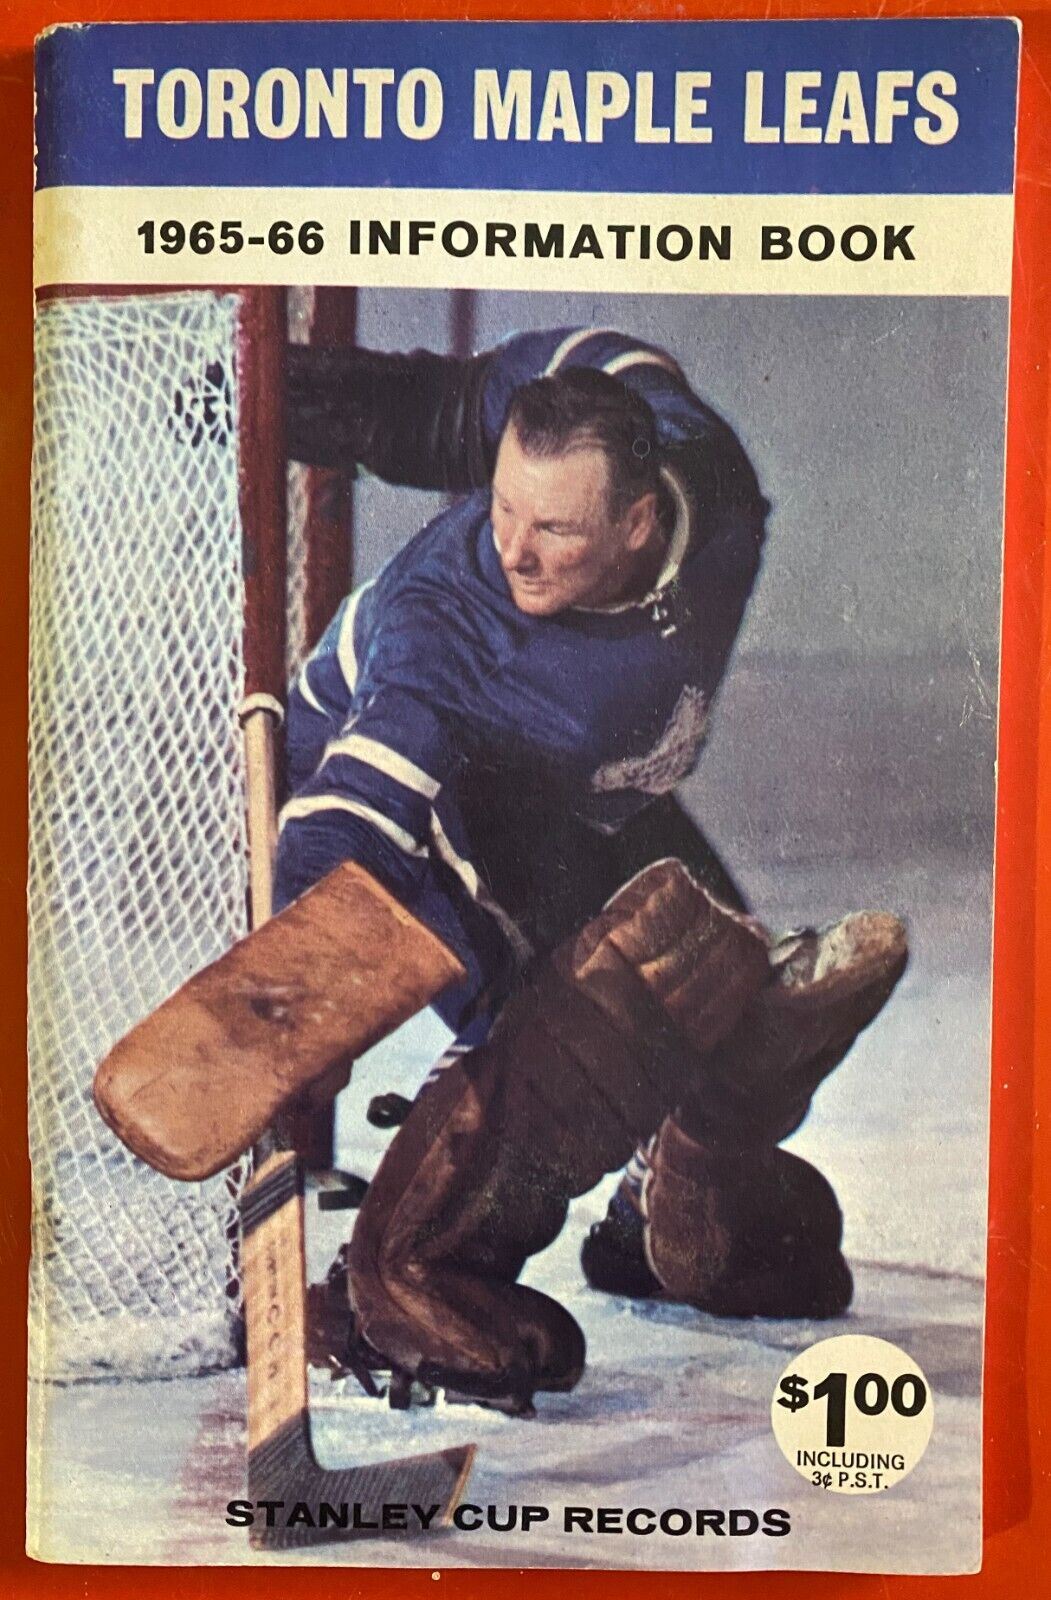 1965-66 Toronto Maple Leafs Information Guide